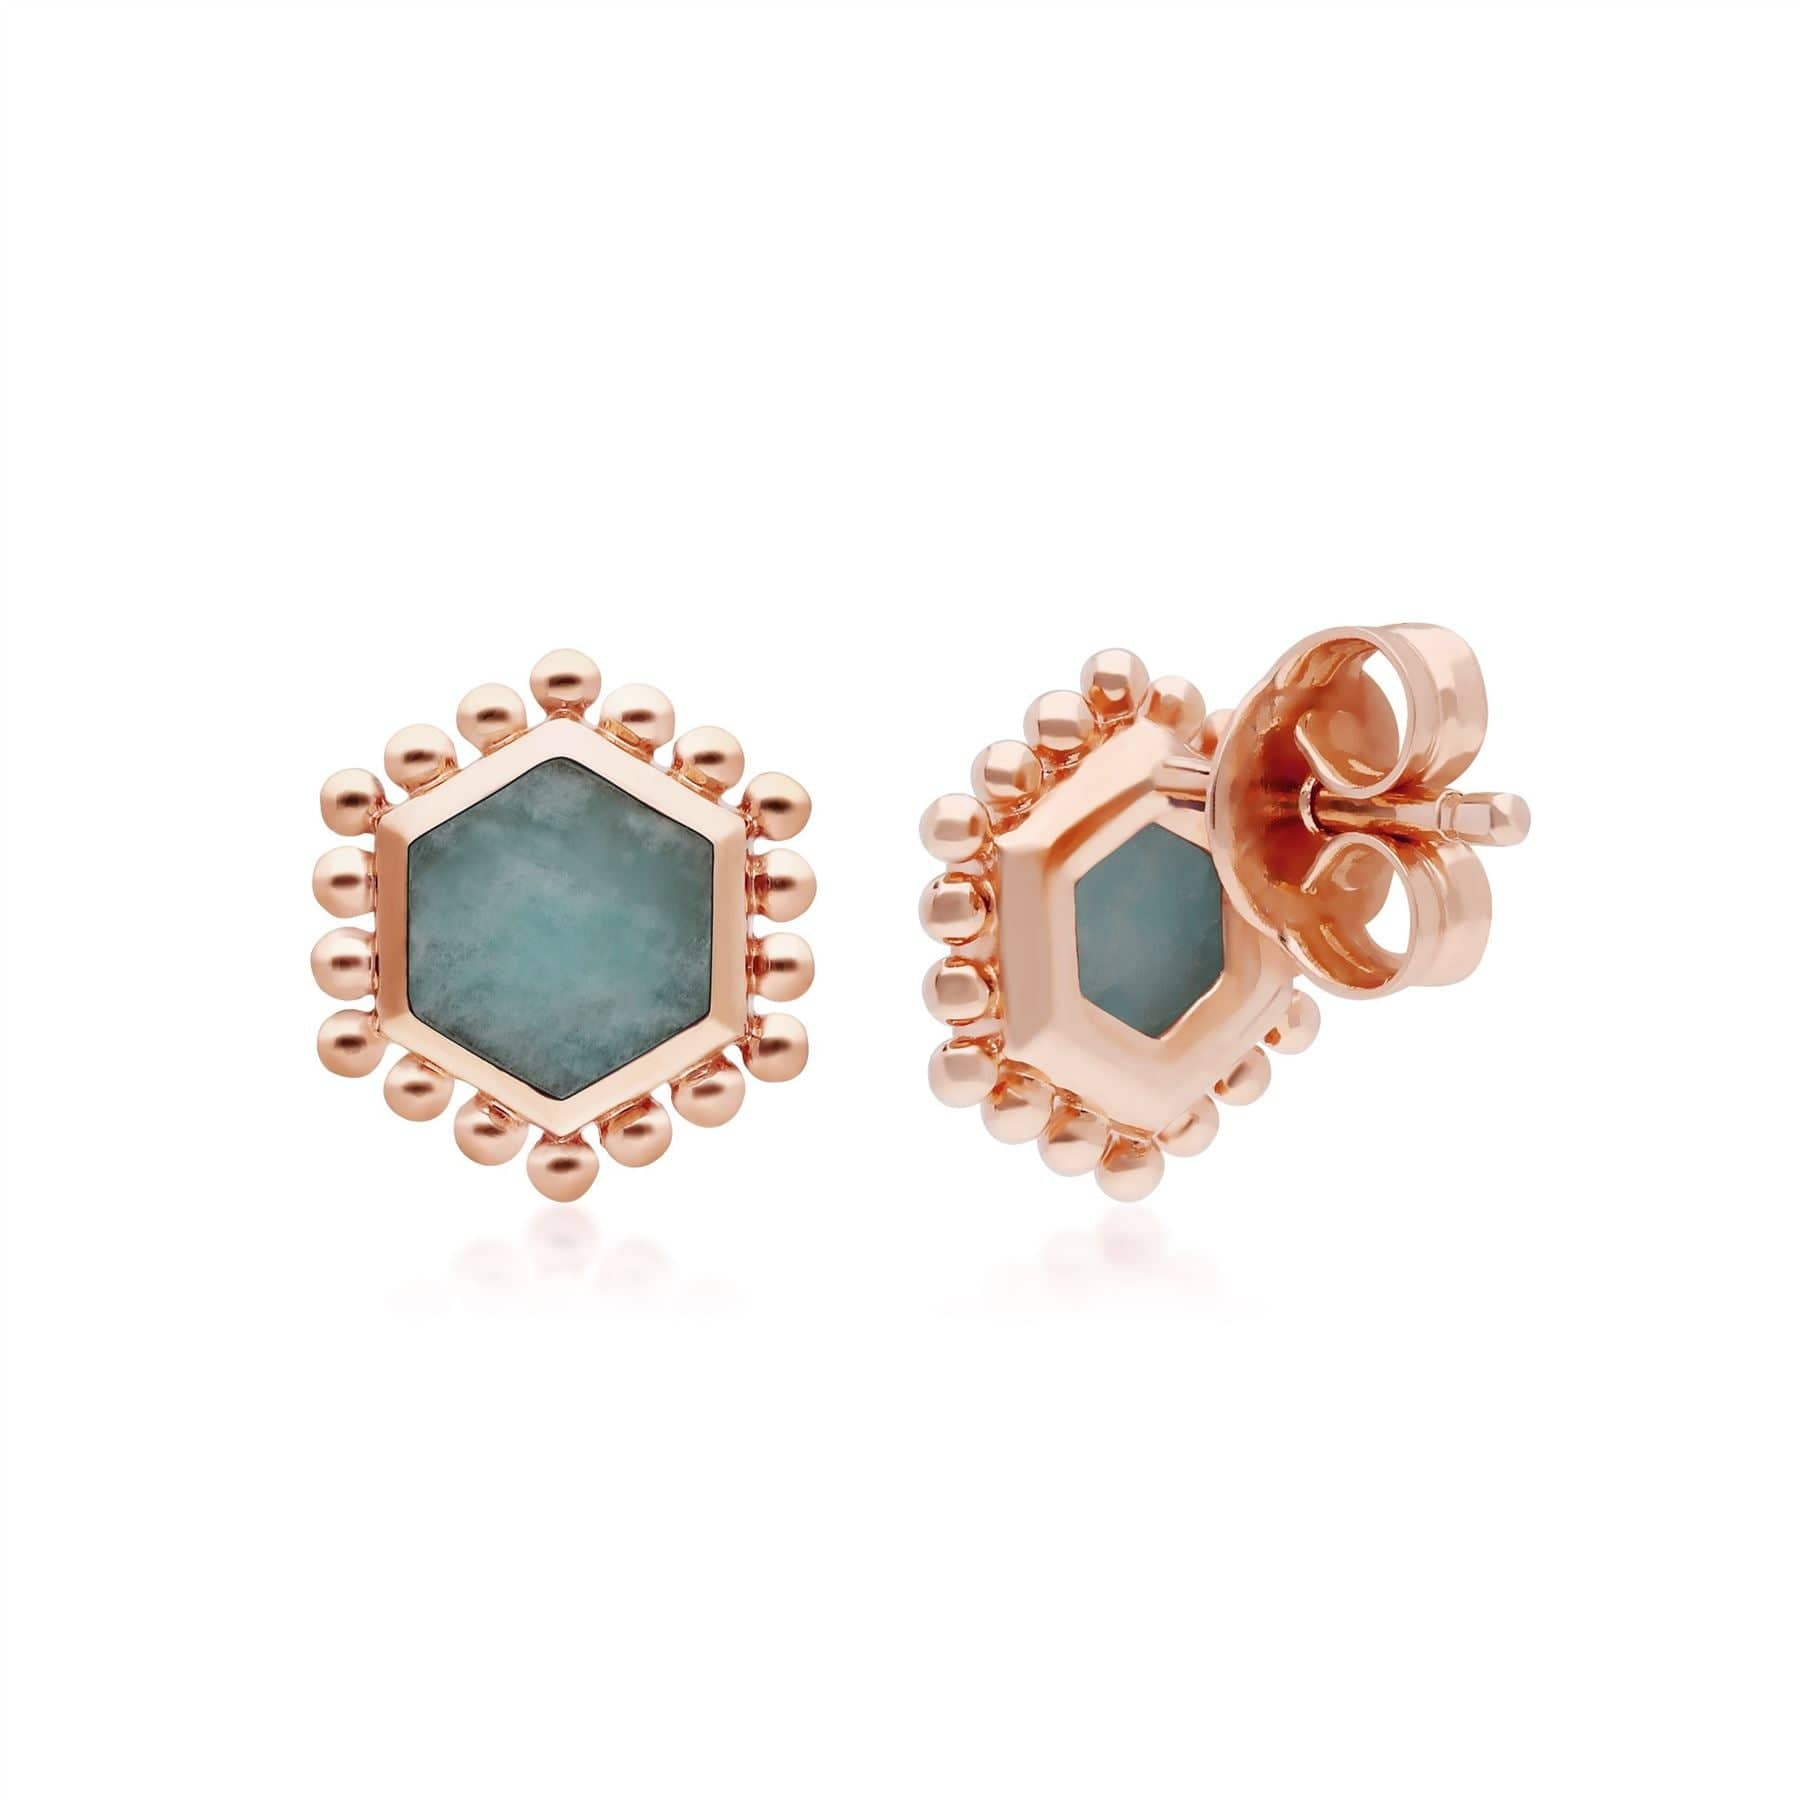 Amazonite Flat Slice Hex Stud Earrings in Rose Gold Plated Sterling Silver